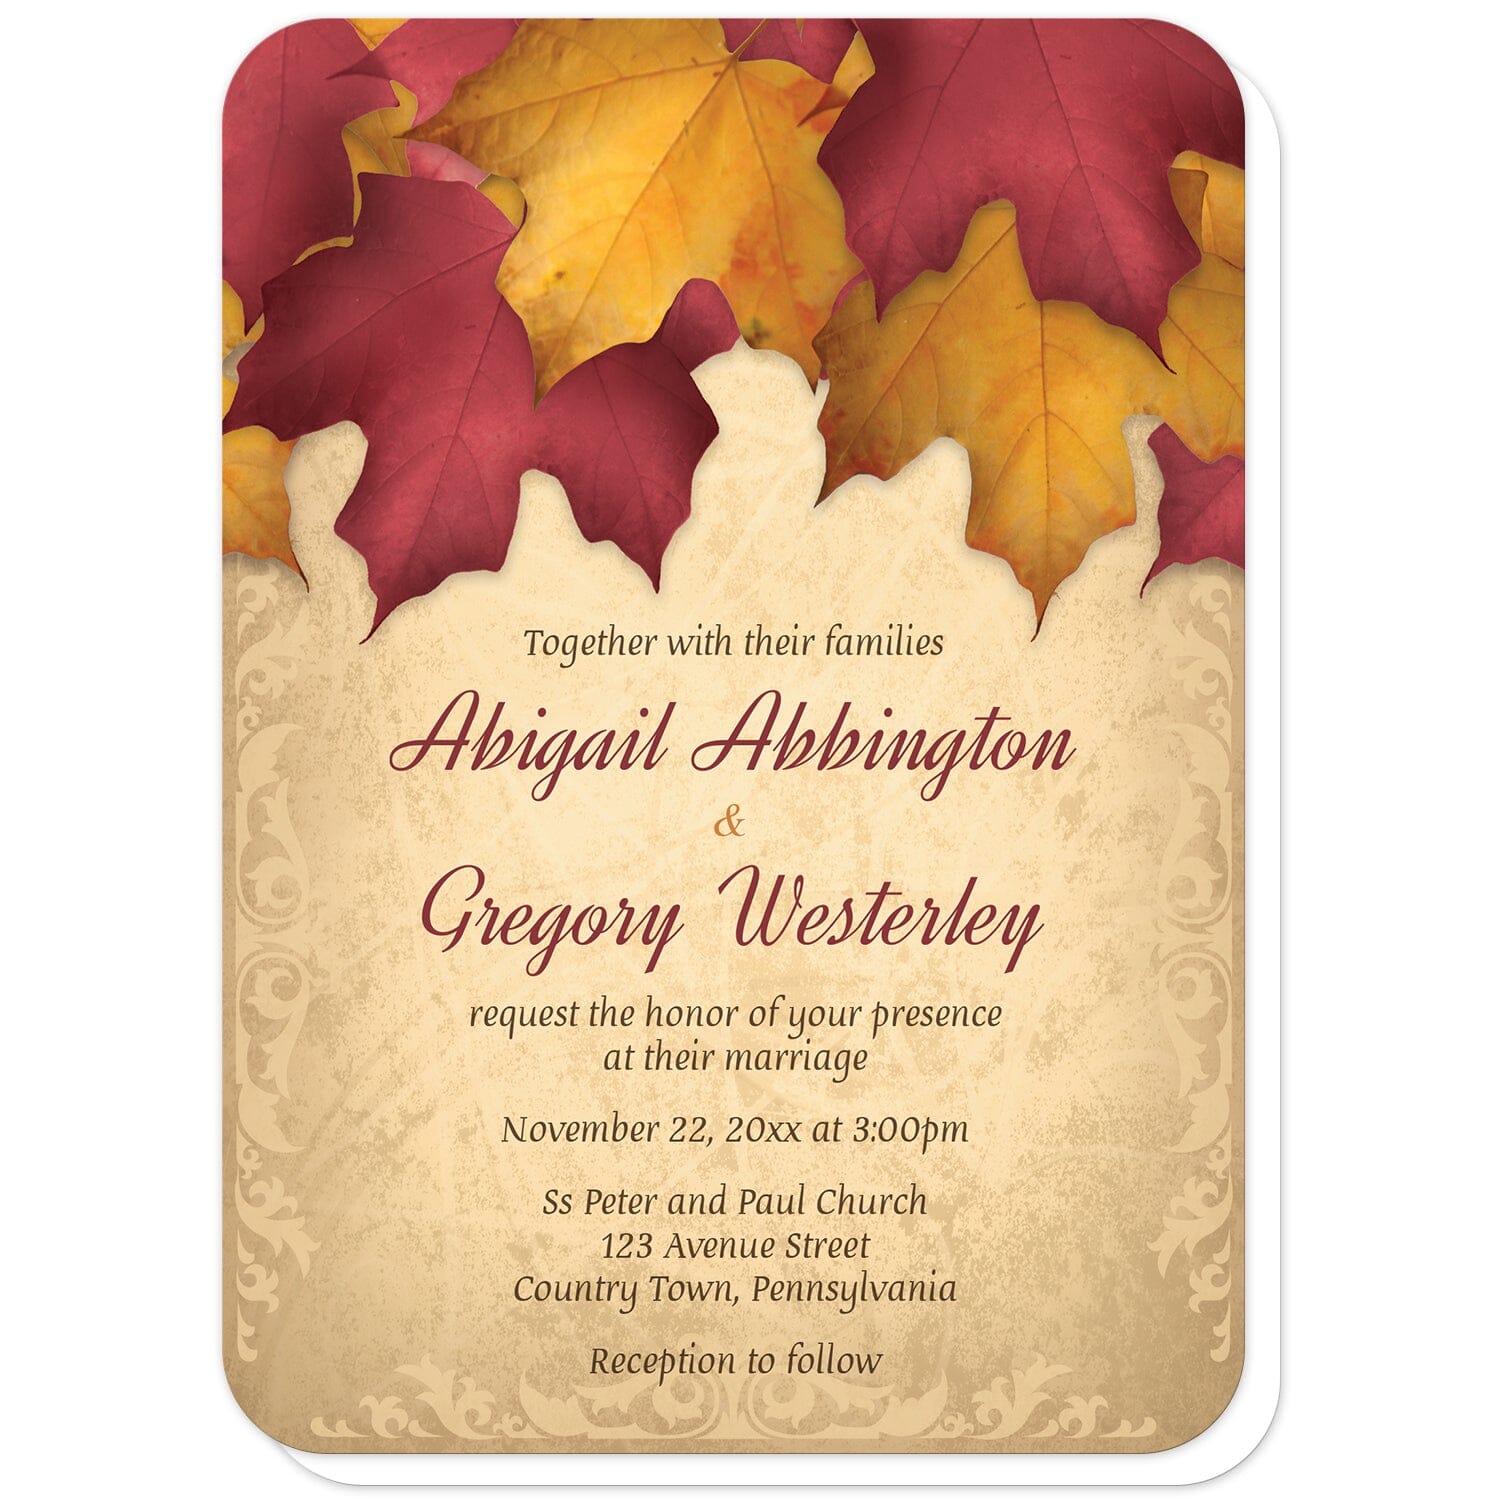 Rustic Burgundy Gold Autumn Wedding Invitations (with rounded corners) at Artistically Invited. Rustic burgundy gold autumn wedding invitations with an arrangement of burgundy and gold fall leaves along the top over a beautiful gold colored background with elegant flourishes along the edges. Your personalized marriage celebration details are custom printed in burgundy and brown over the gold background.